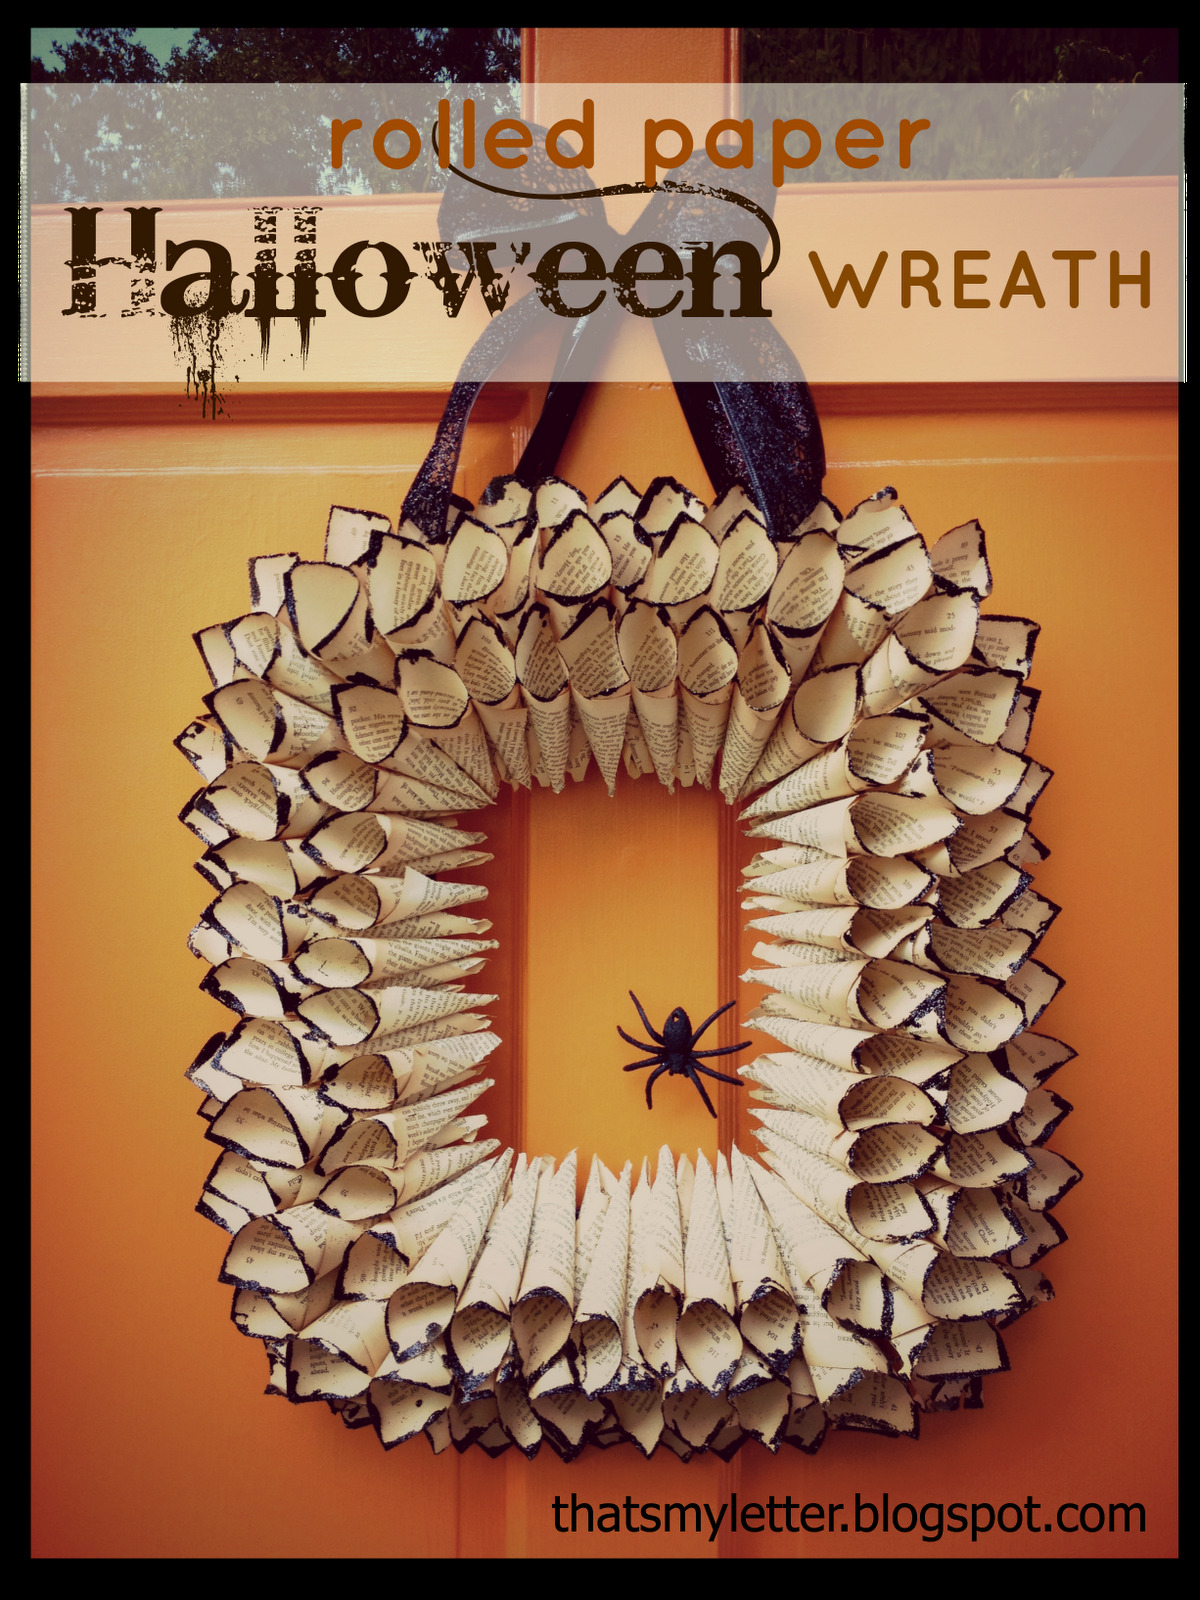 20 Creepy DIY Halloween Wreath Designs That Will Send Shivers Down Your Spine